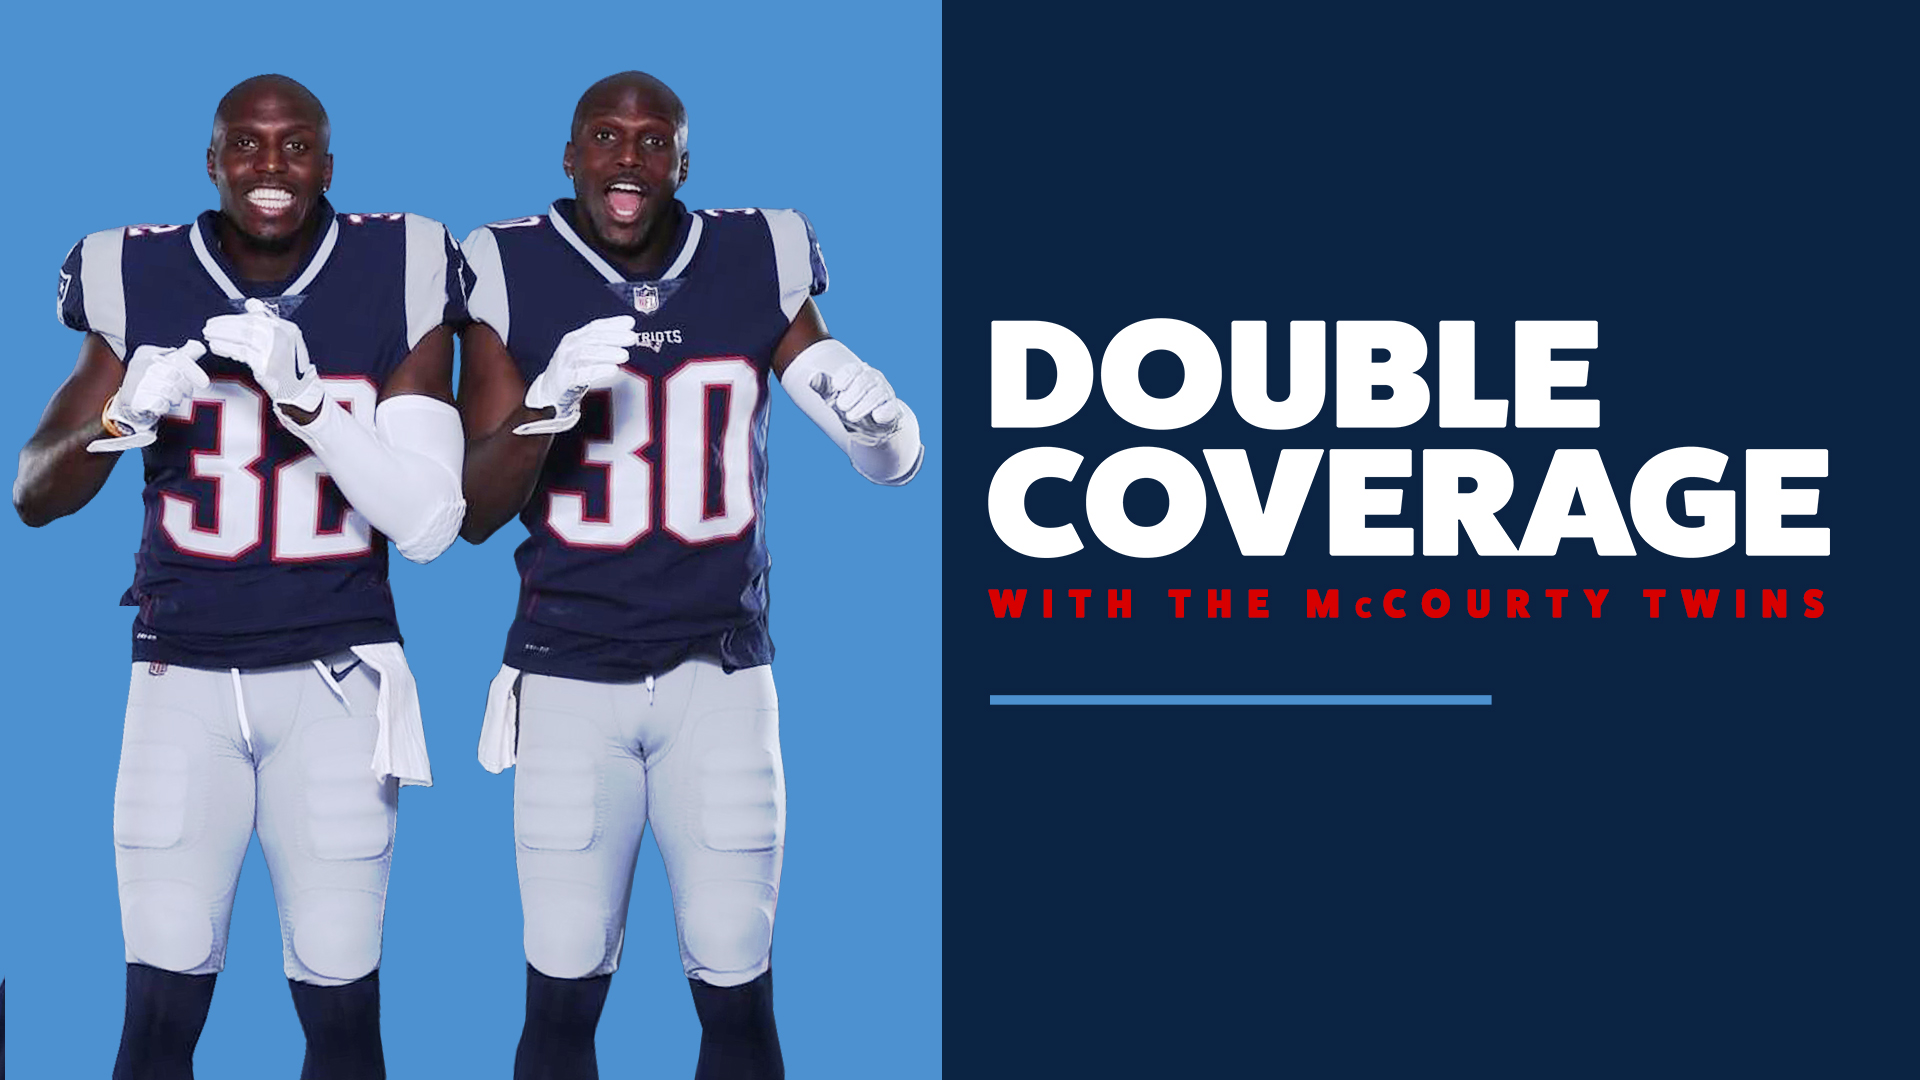 ‘Double Coverage With The McCourty Twins’ Podcast Comes To NESN